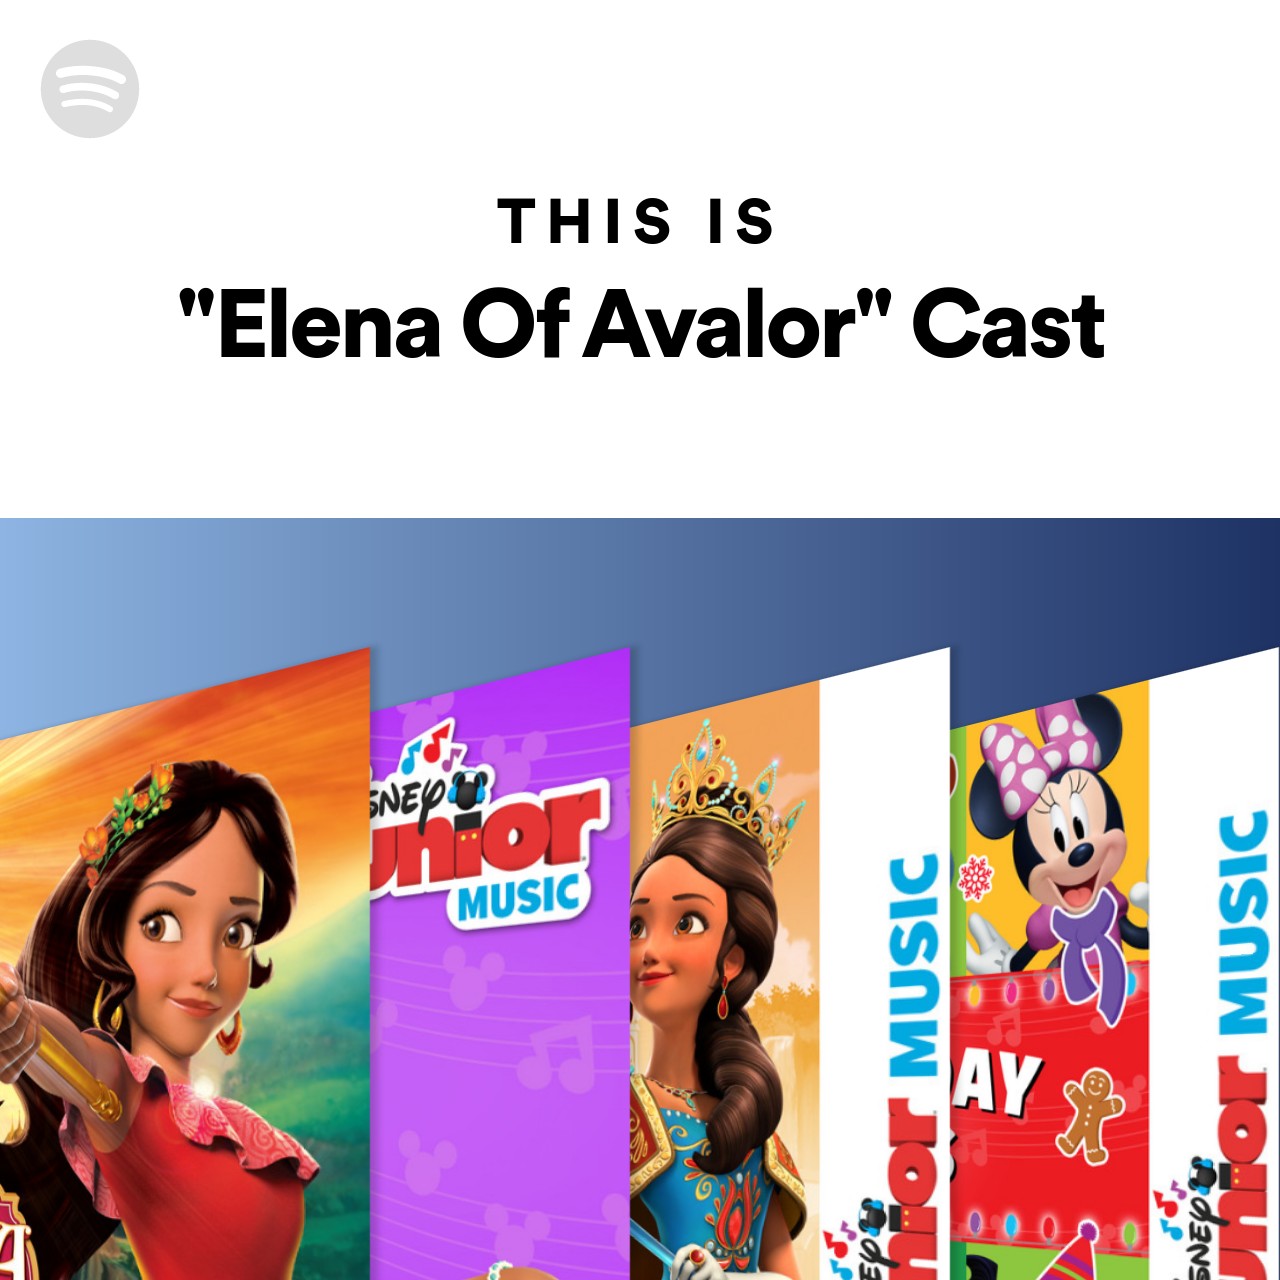 This Is "Elena Of Avalor" Cast